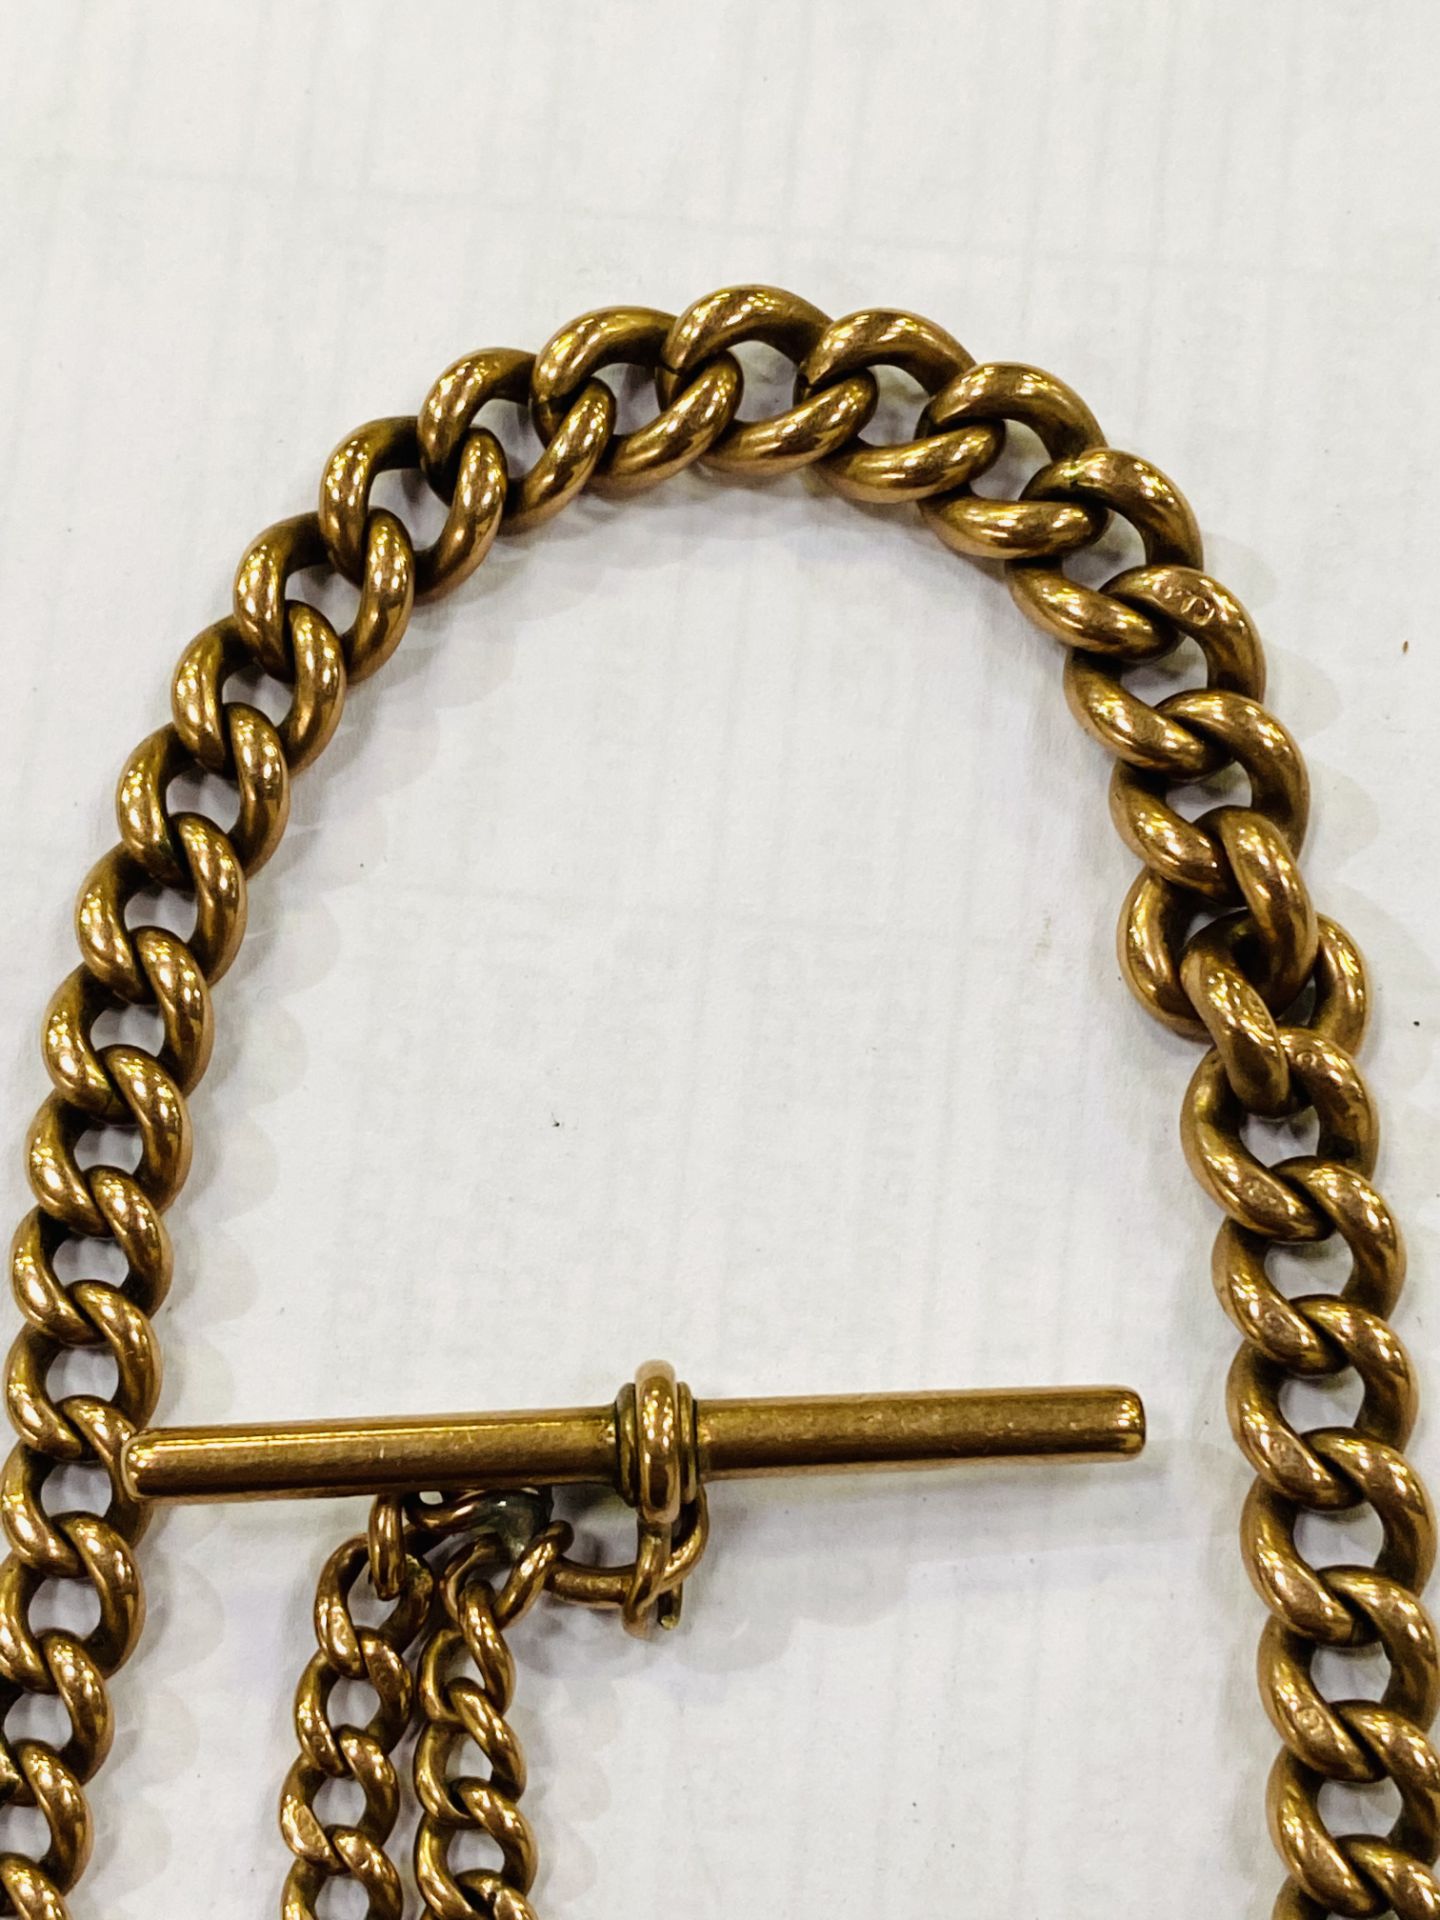 9ct gold fob chain - Image 2 of 3